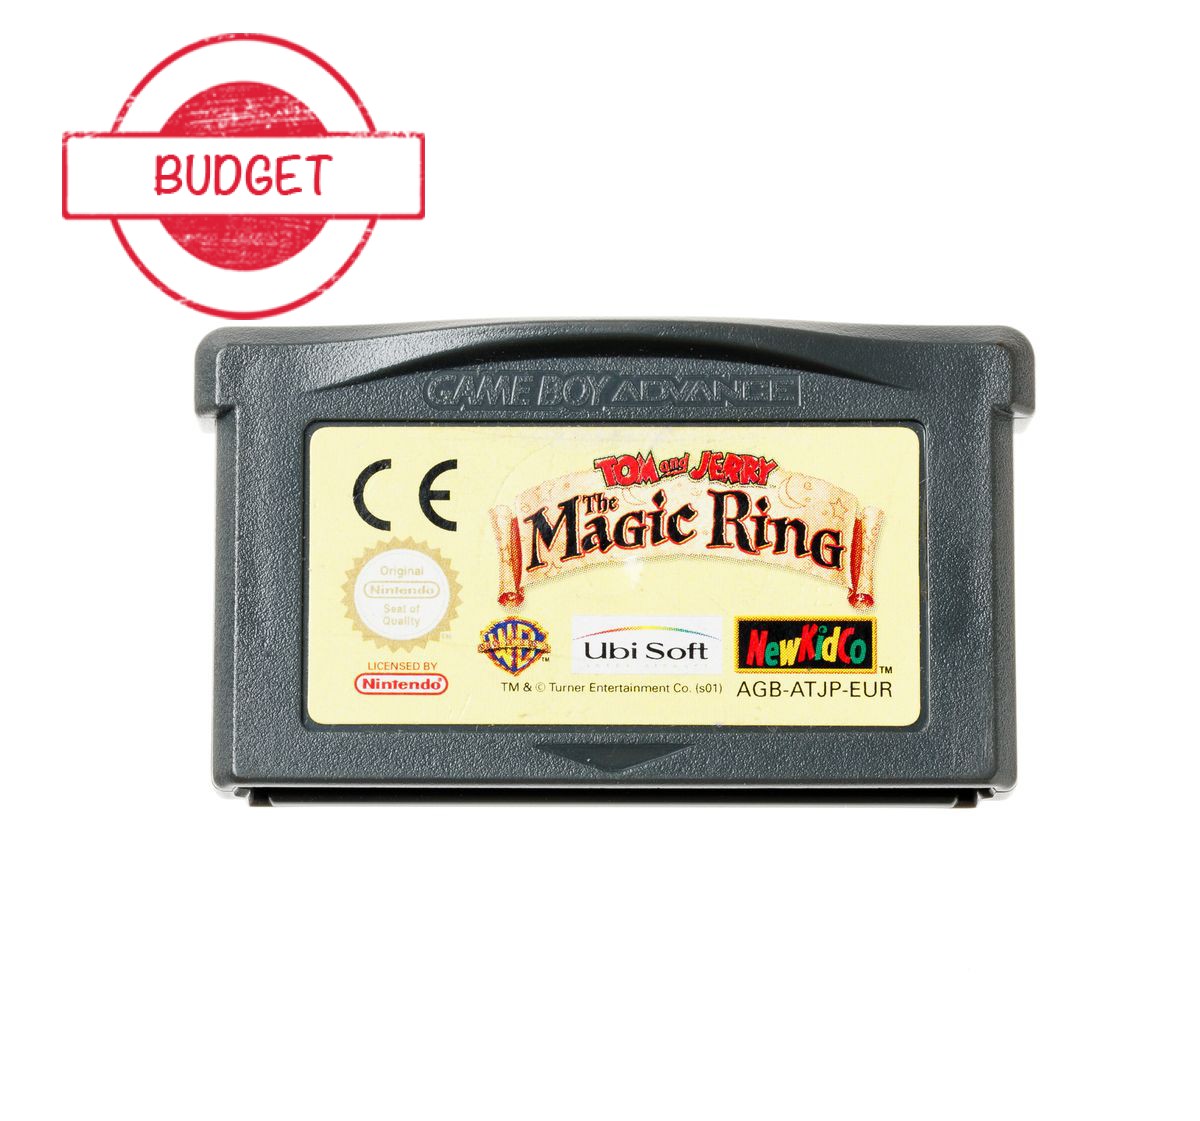 Tom and Jerry: The Magical Ring - Budget Kopen | Gameboy Advance Games